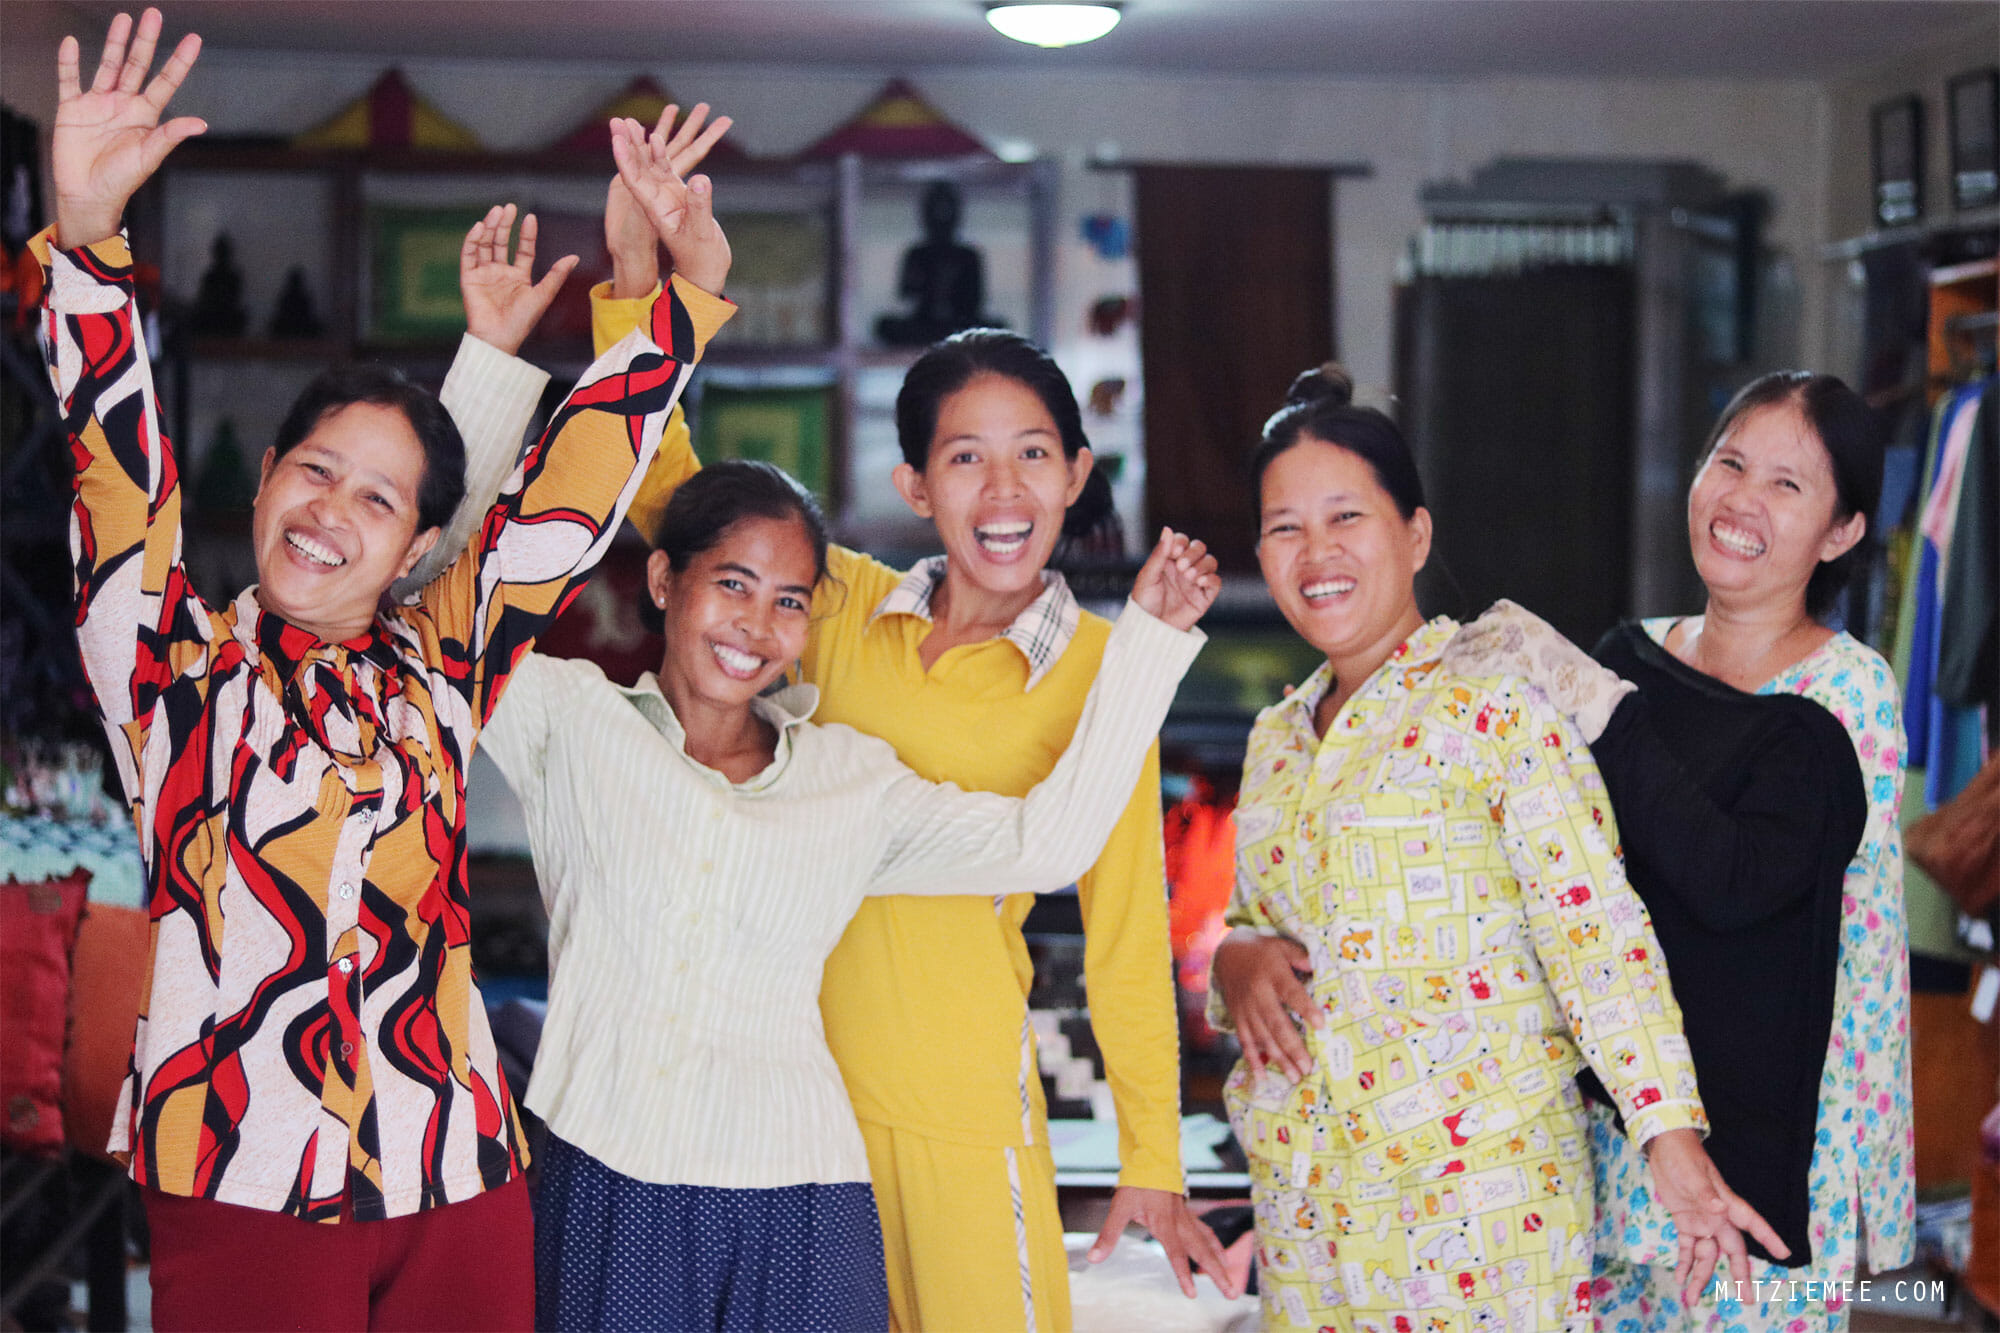 CWSG, Cambodia Women's Support Group in Phnom Penh